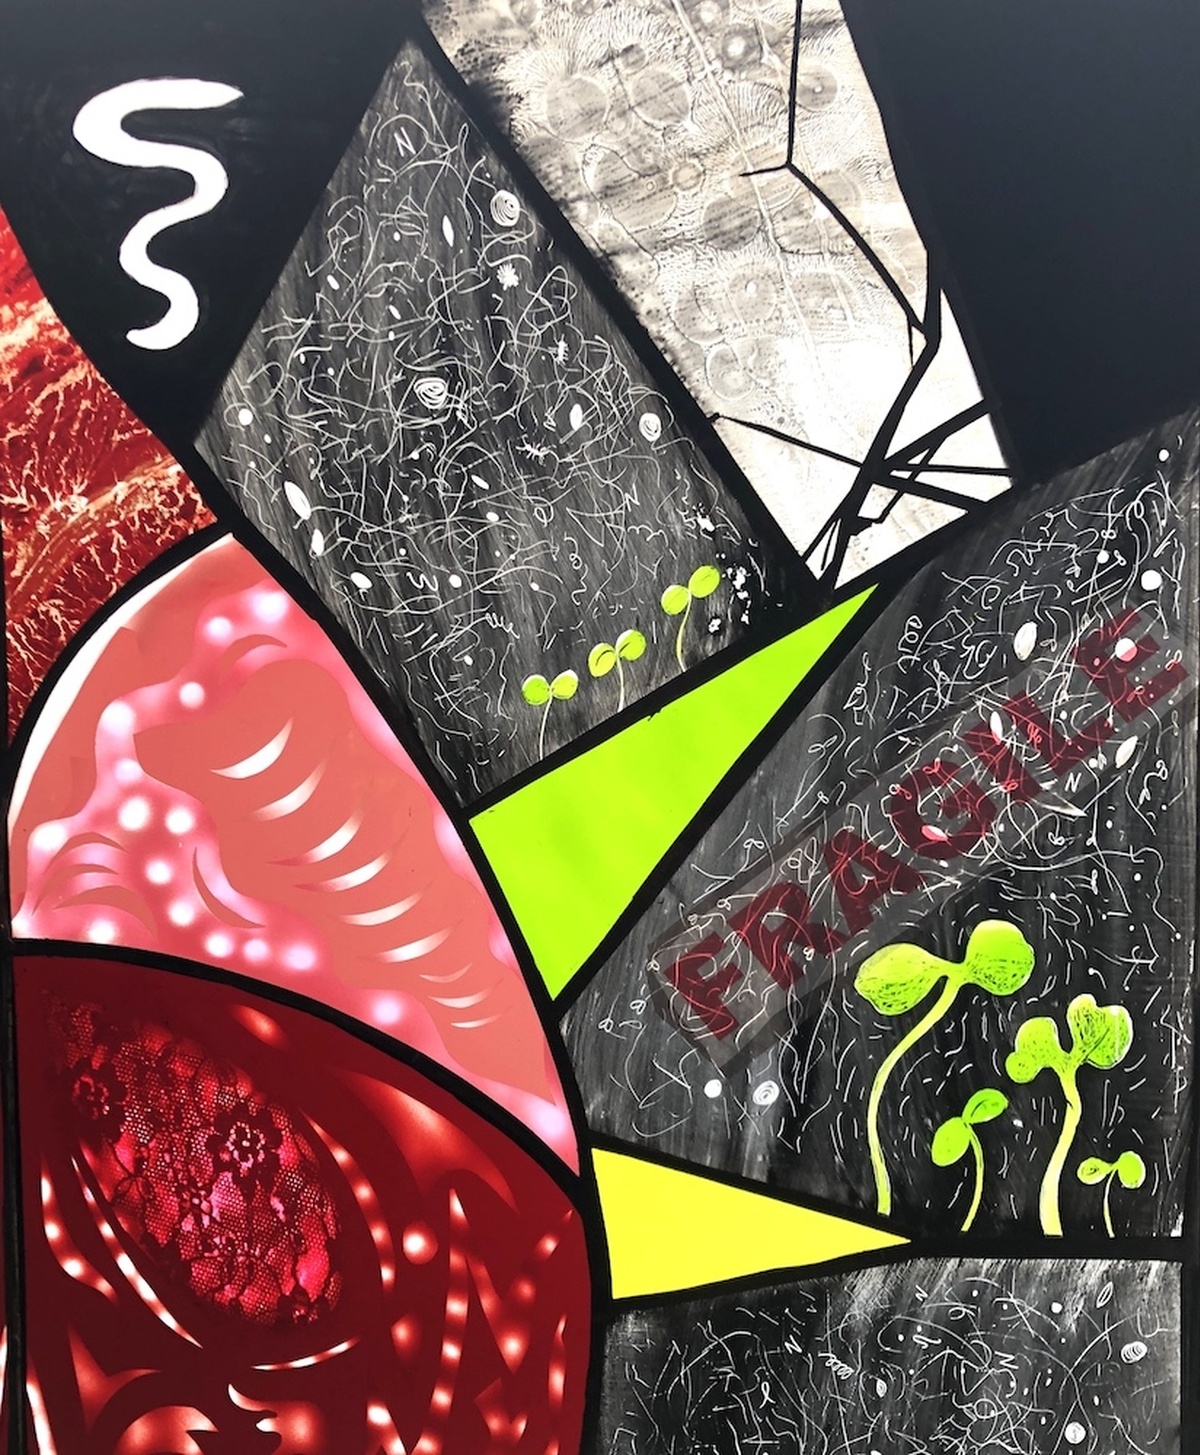 A series of disjointed textured glass panels with various marks, images of seedlings, and the text "FRAGILE".